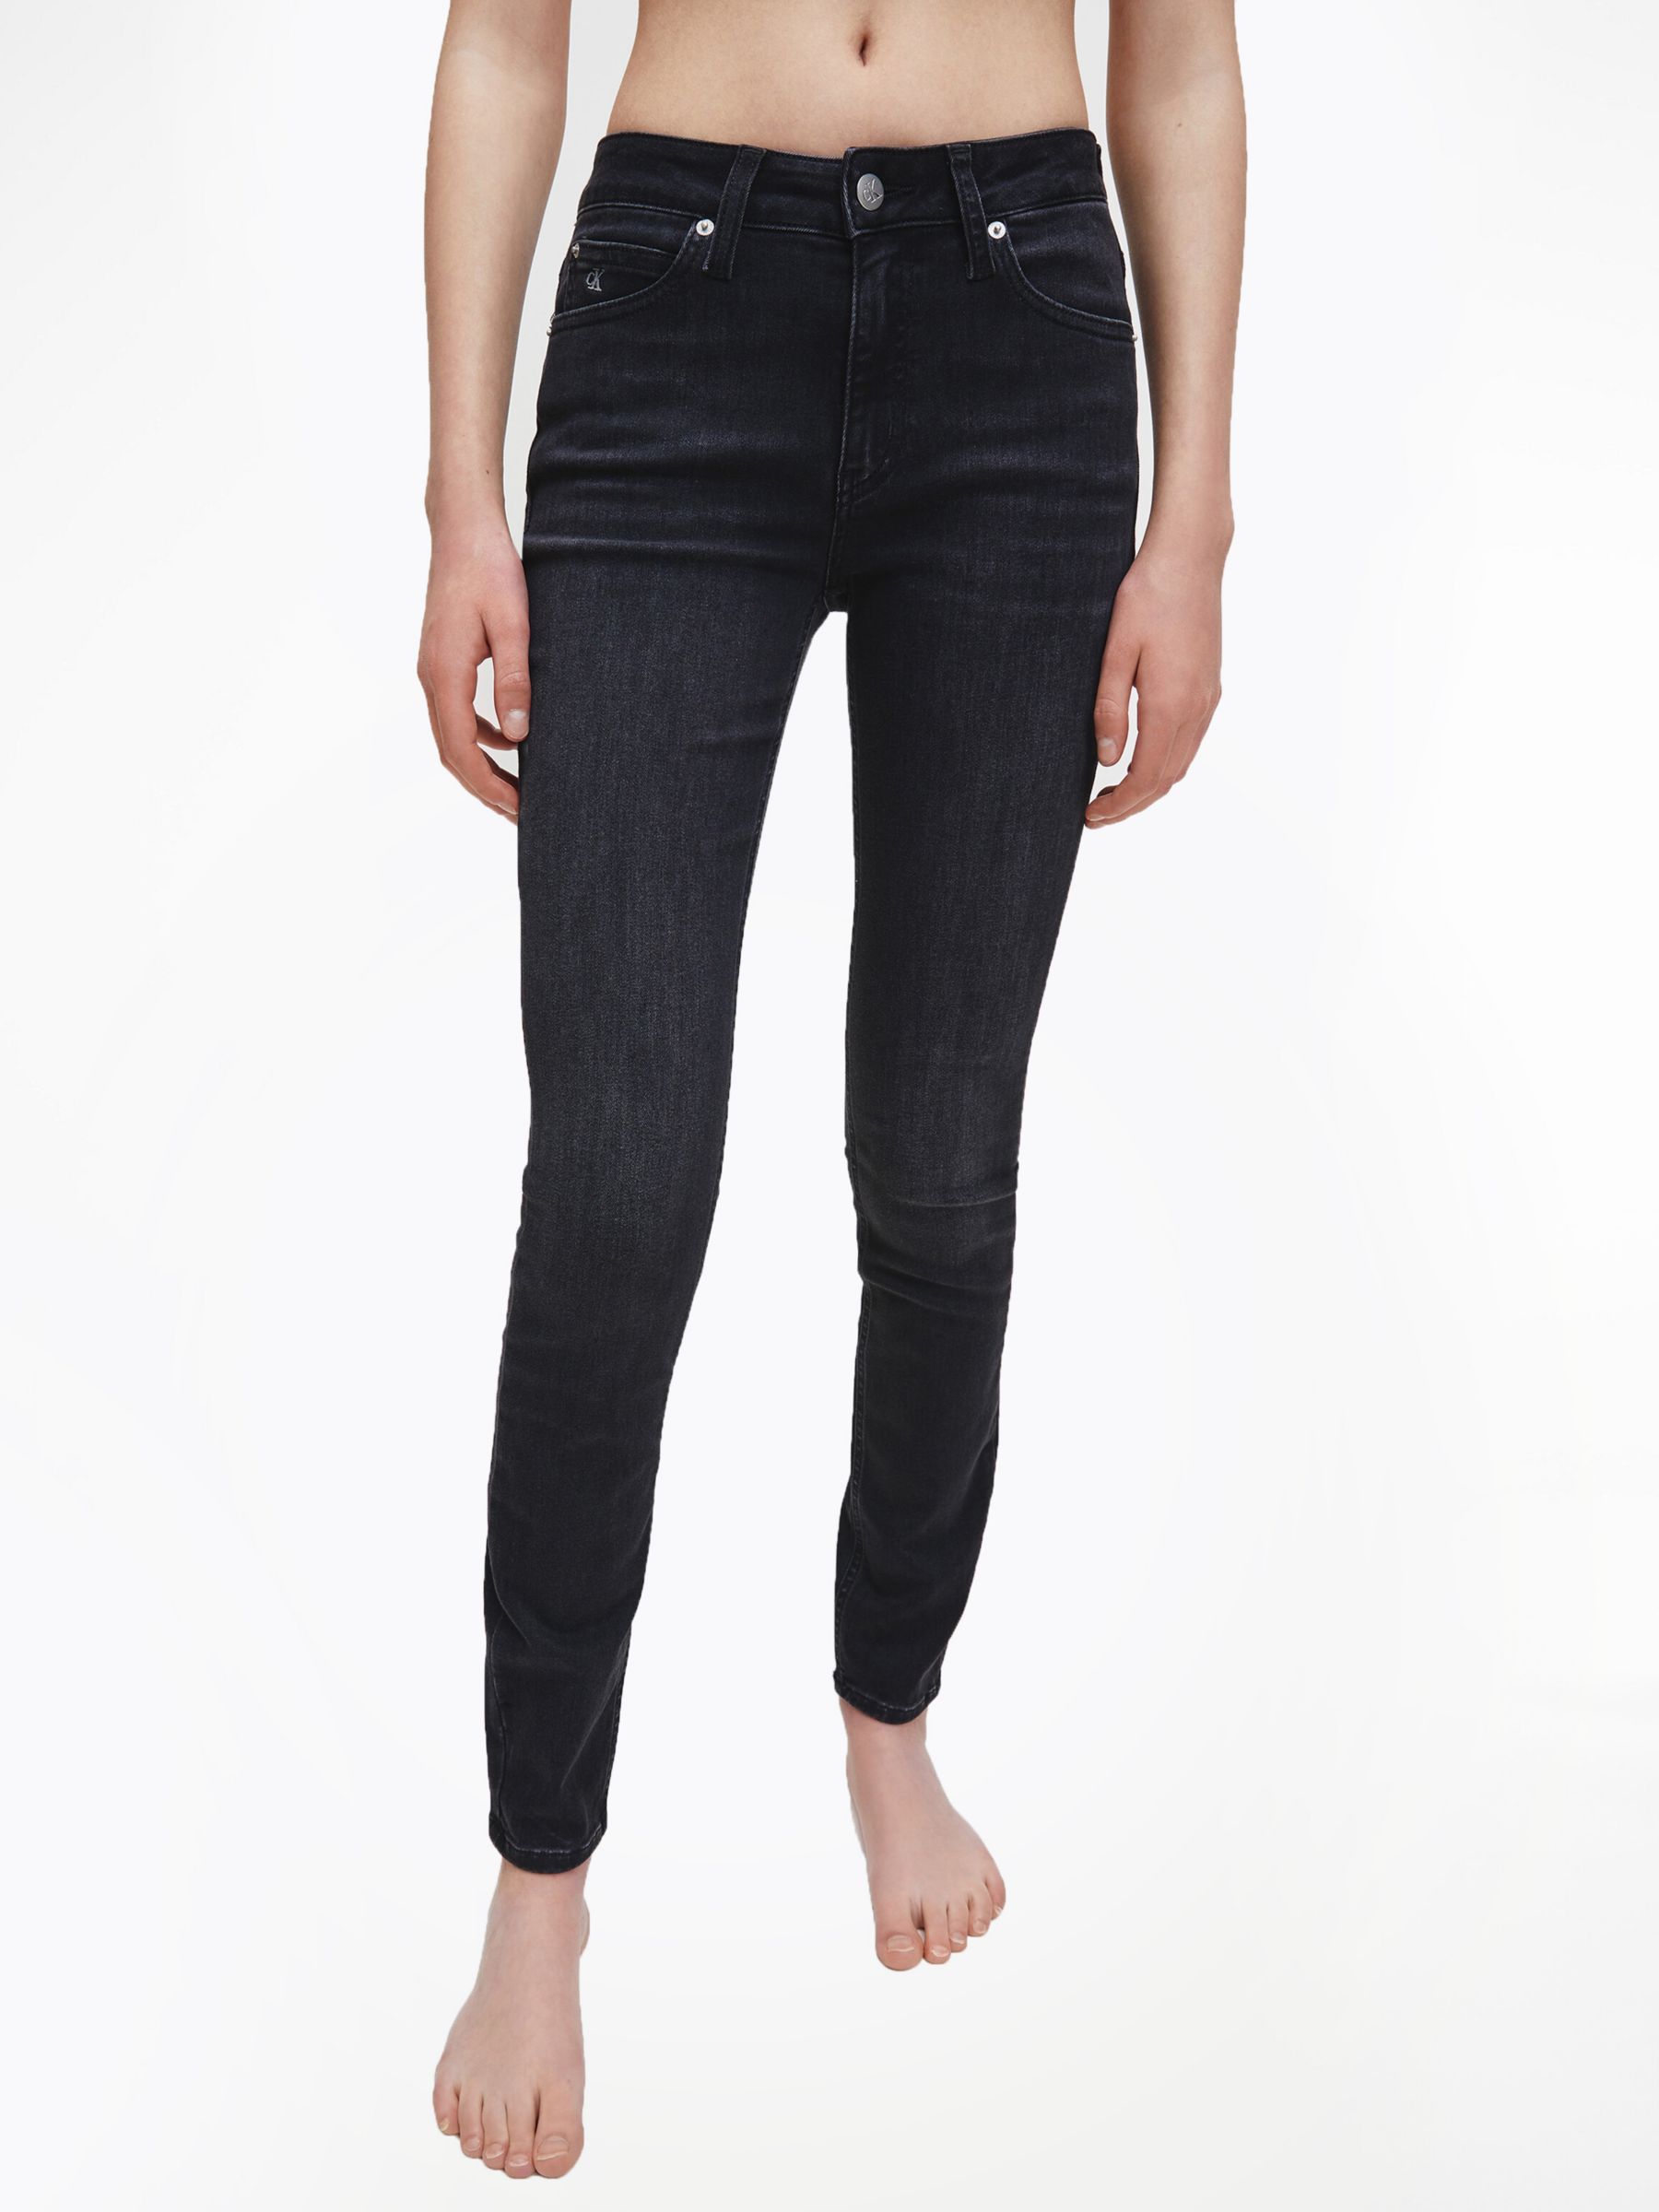 Calvin Klein Mid Rise Skinny Jeans, Washed Black, 28S